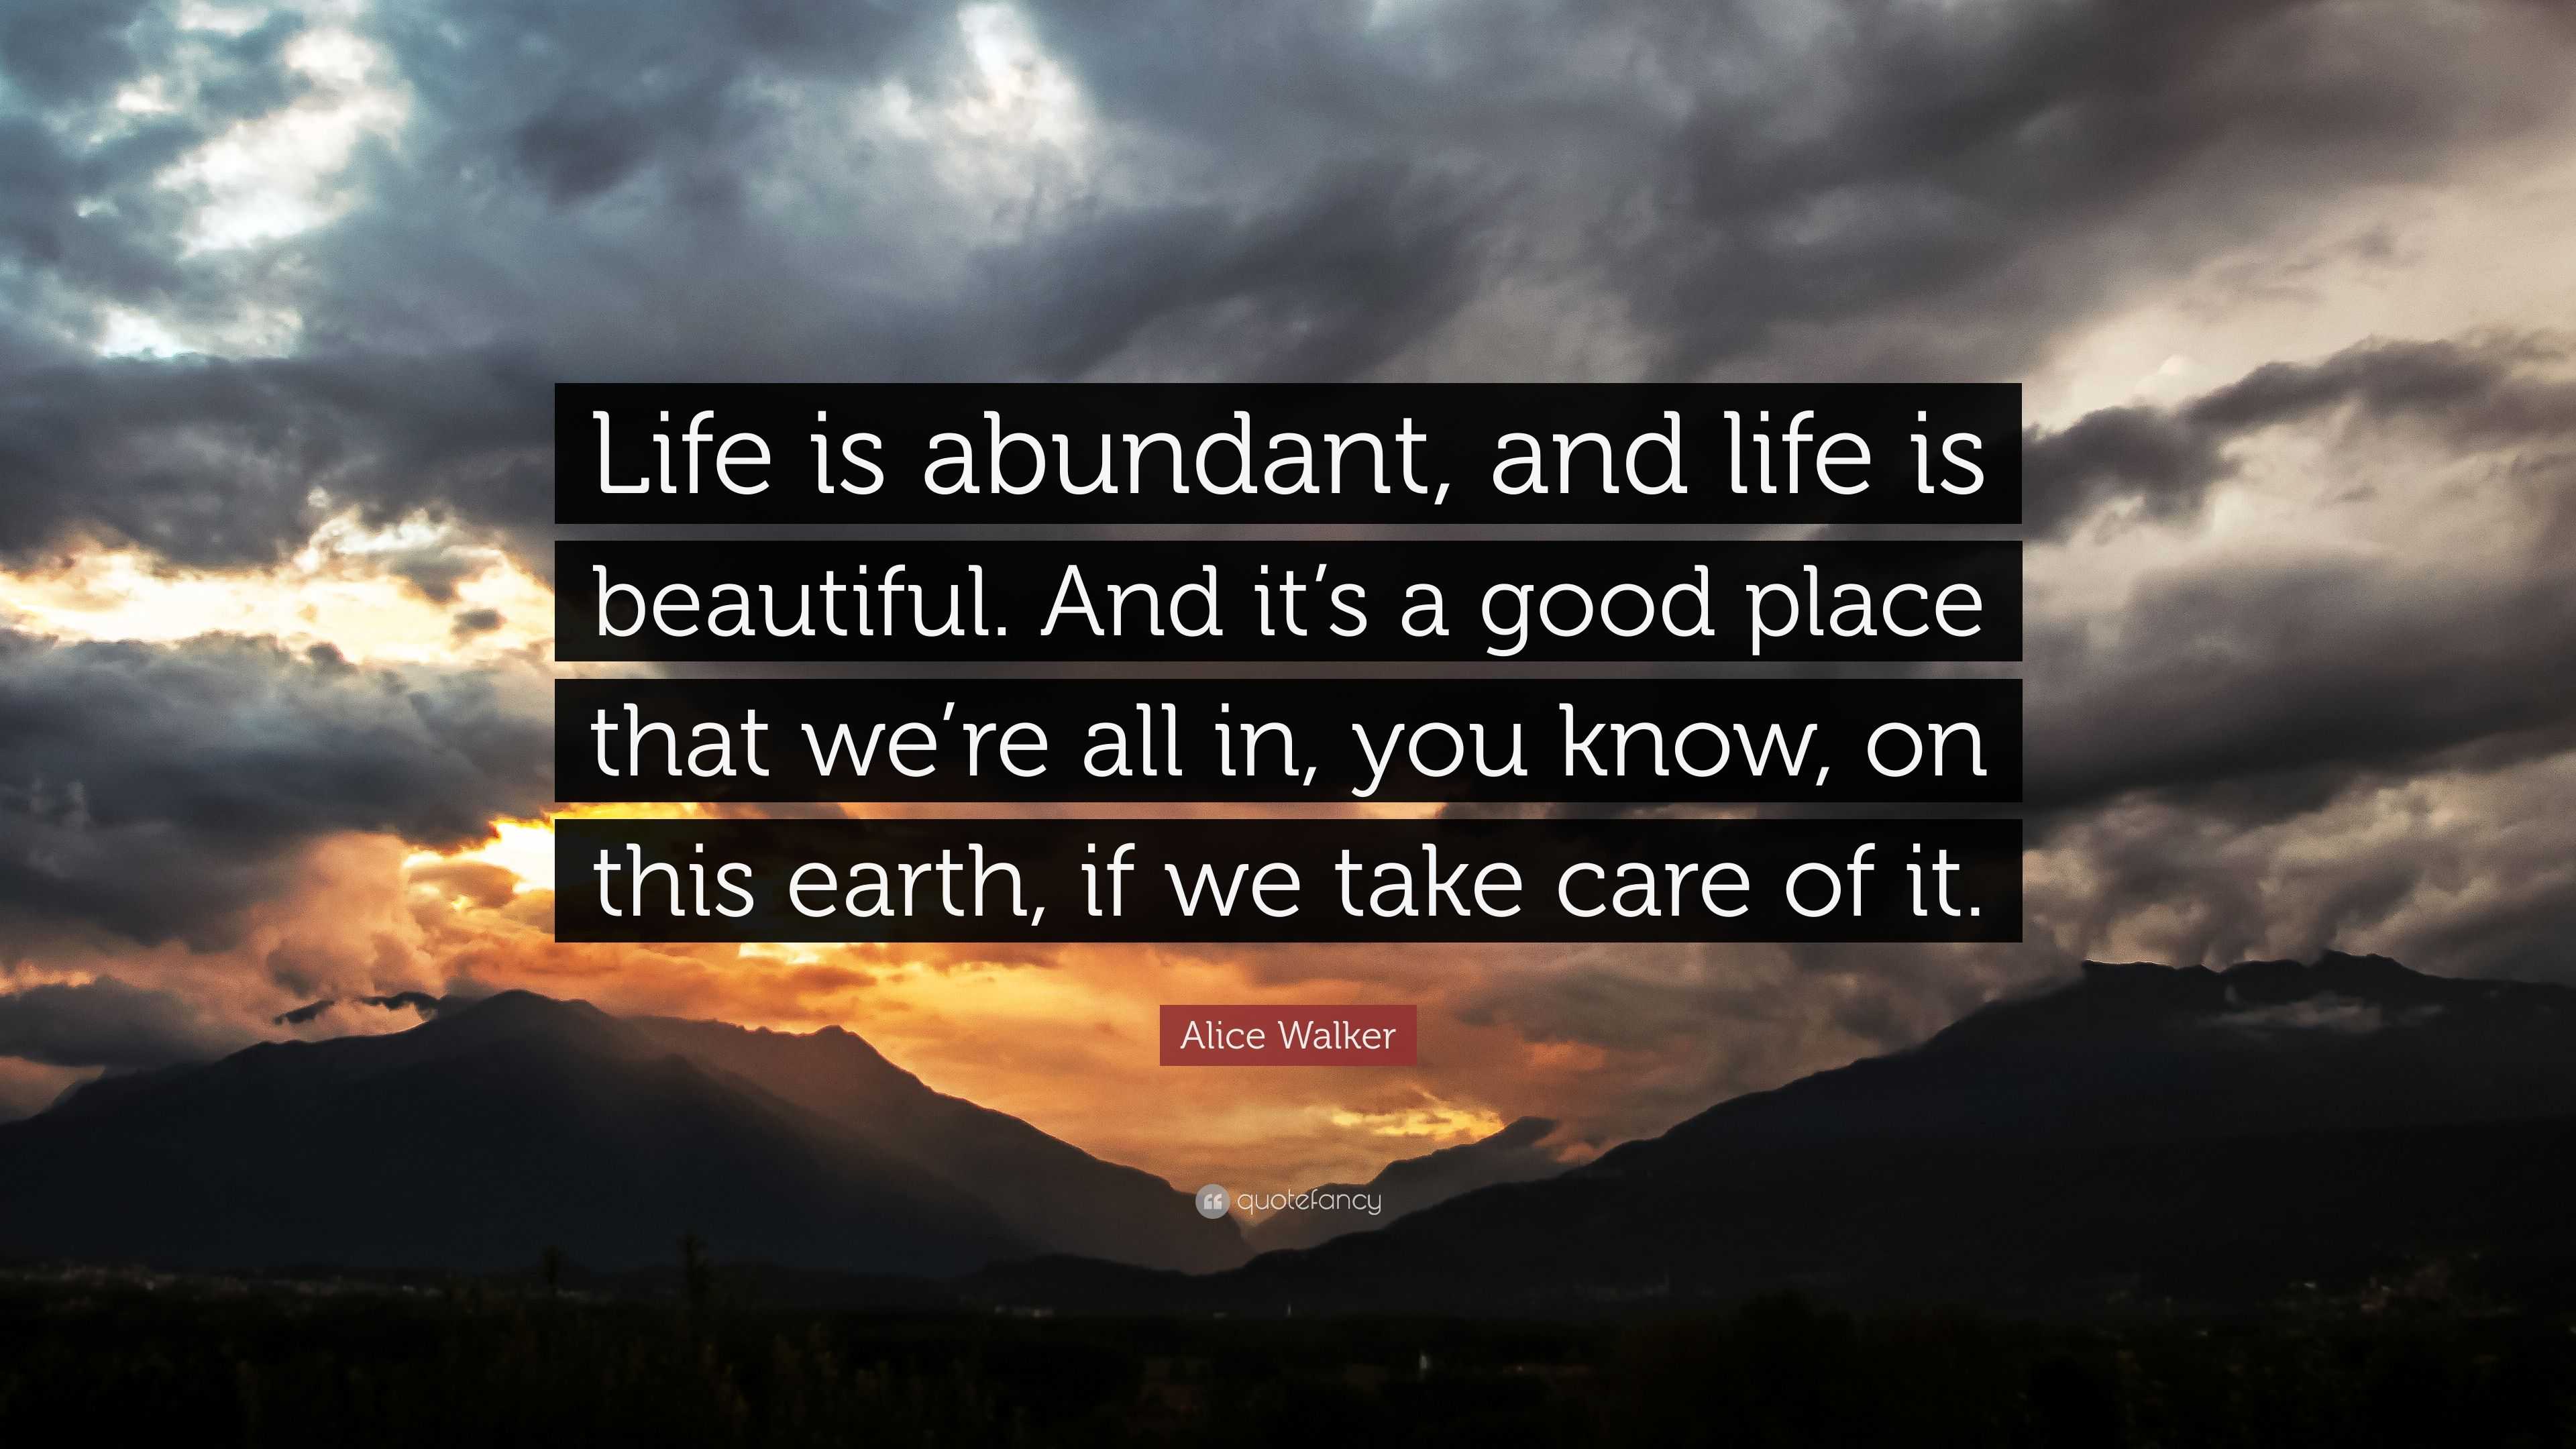 Alice Walker Quote “Life is abundant and life is beautiful And it s